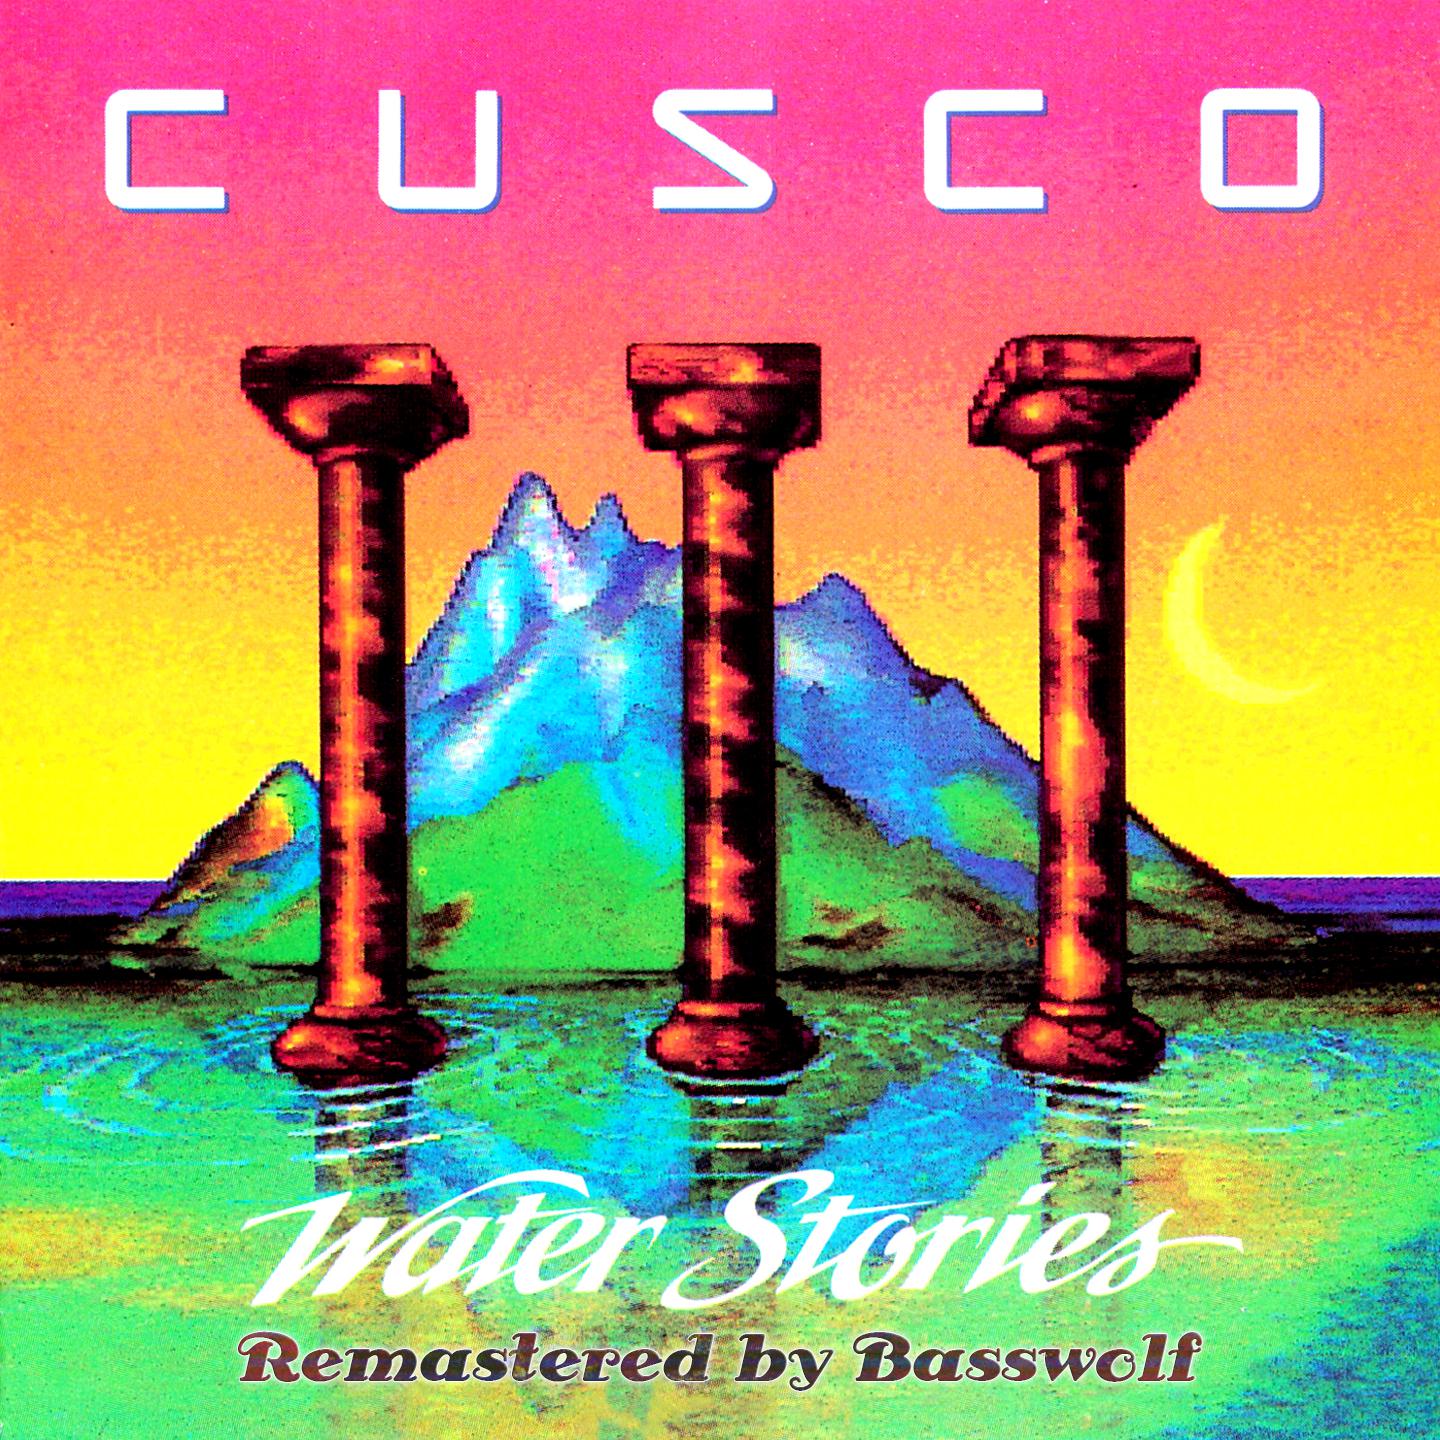 Cusco - Sun Of Jamaica (Remastered By Basswolf)